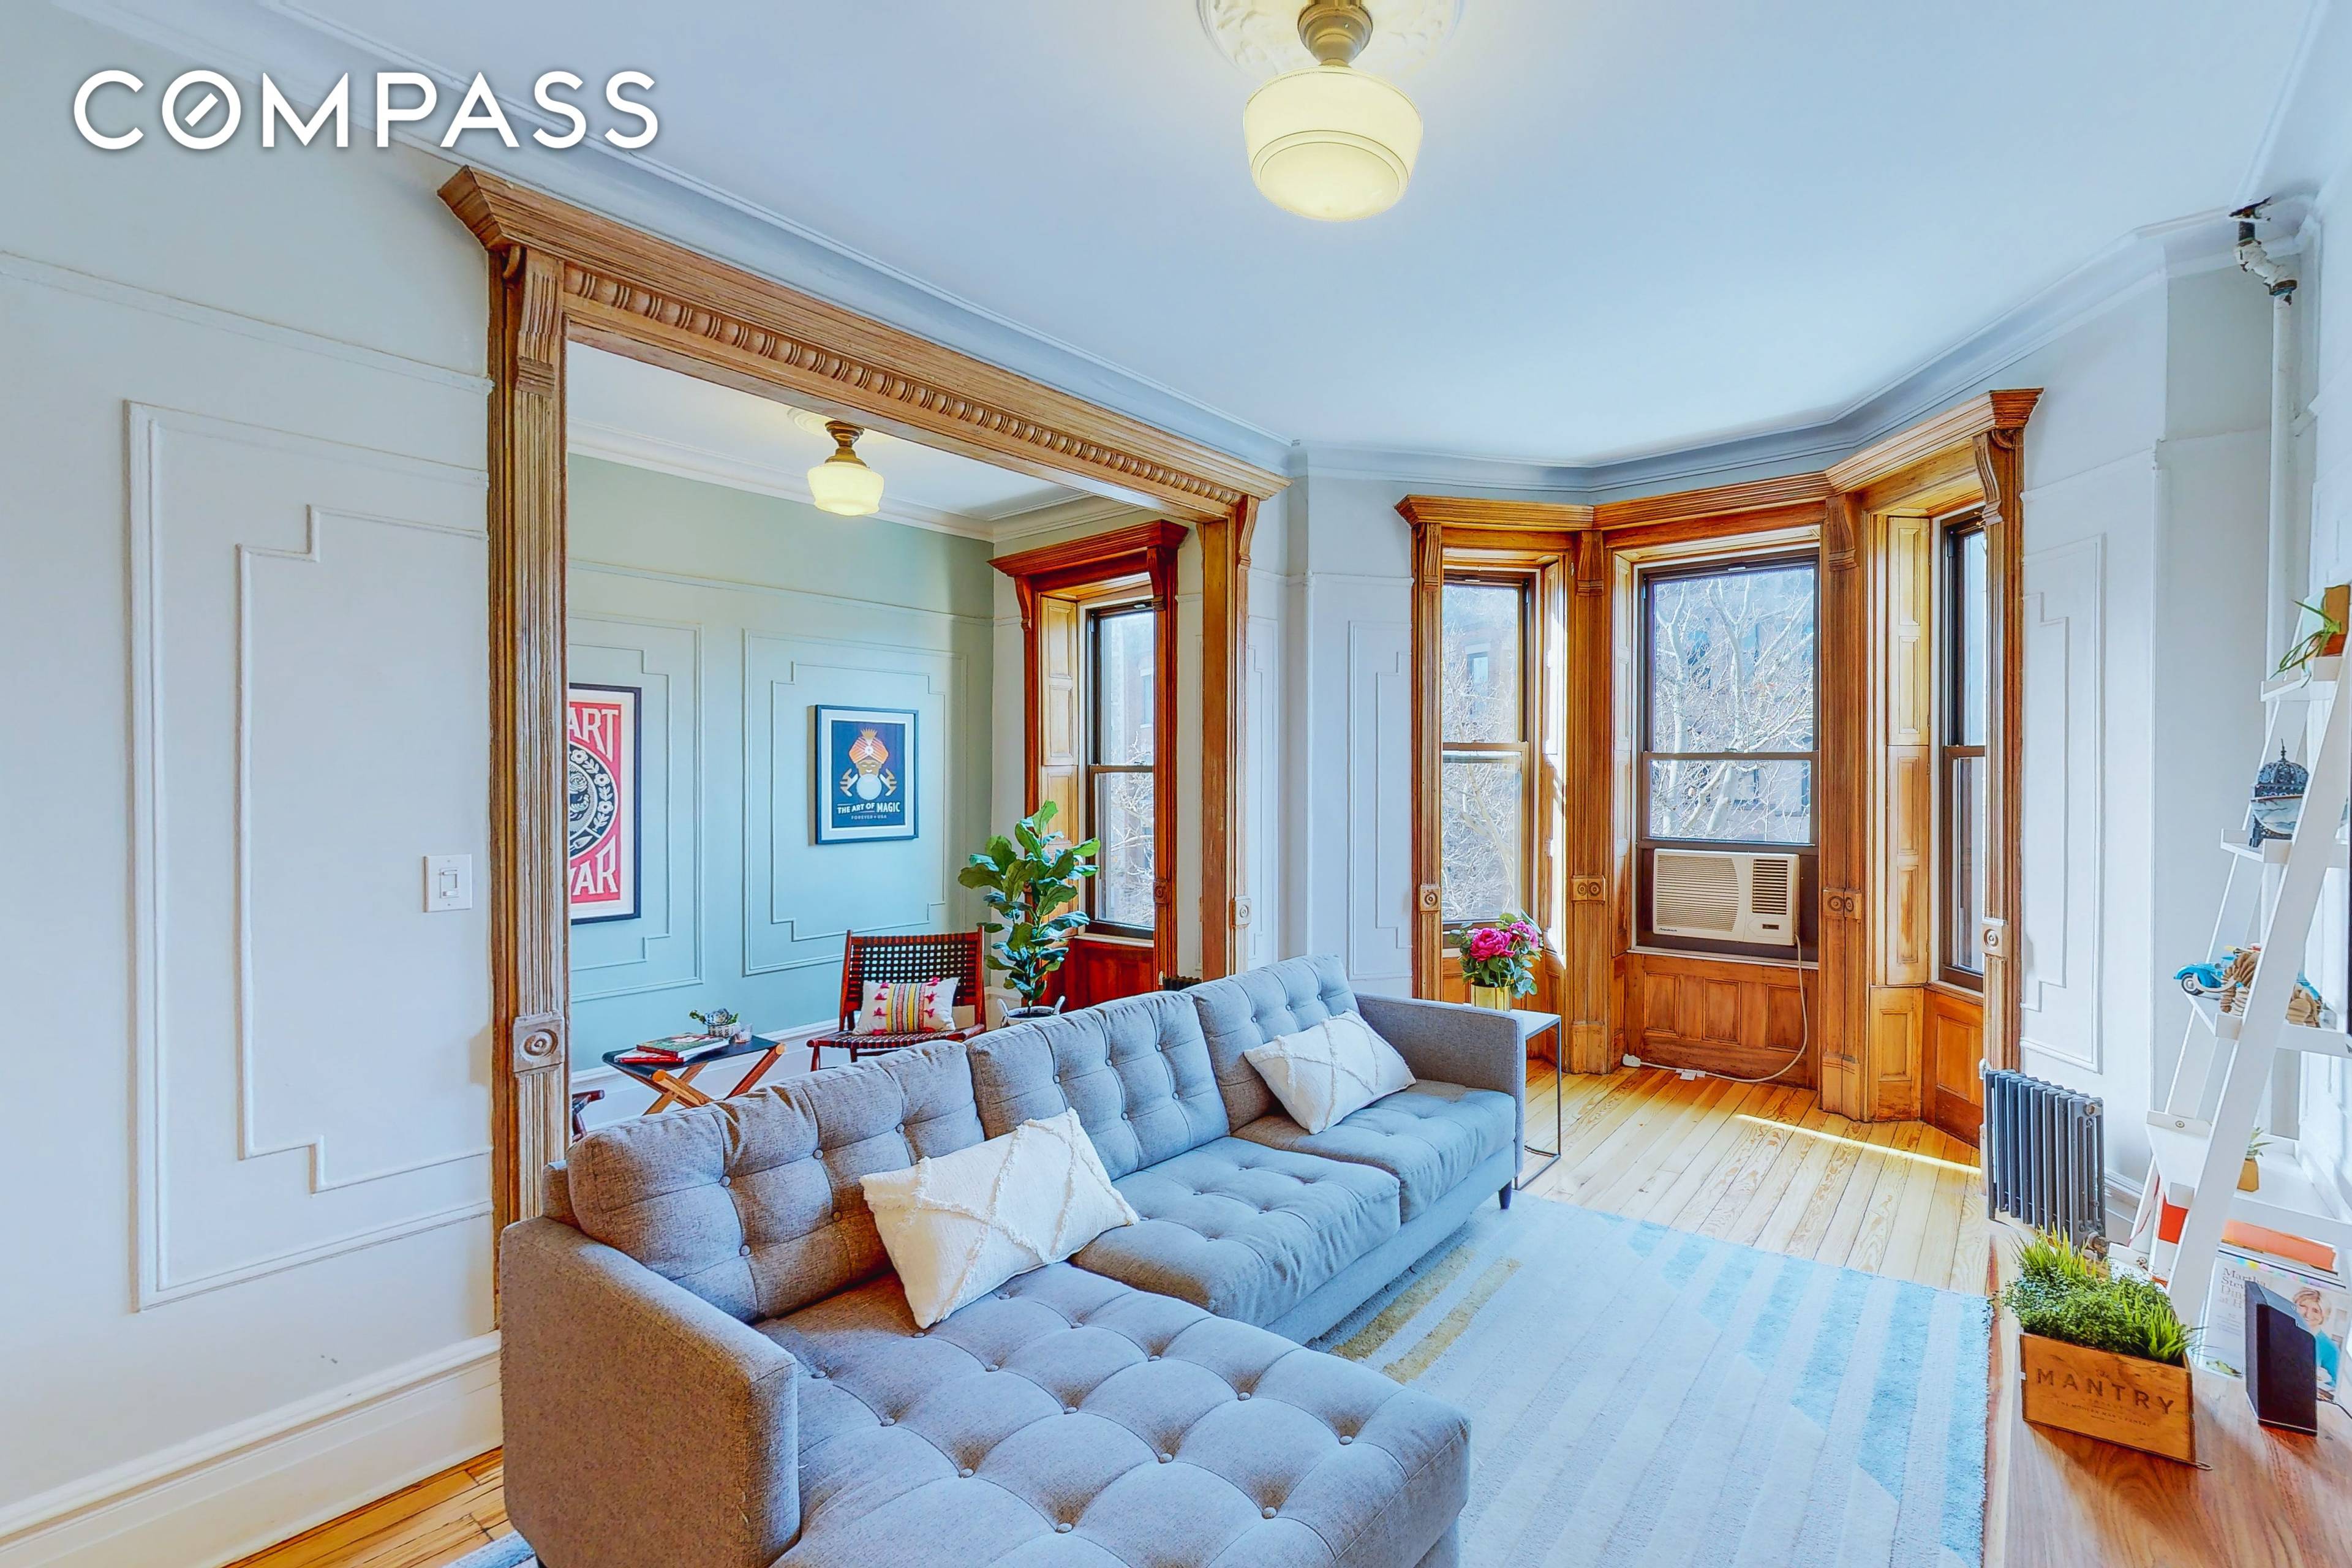 You've been picturing your perfect home in Brooklyn for some time now ; a modern floor through with three bedrooms plus an office, high ceilings, hardwood floors, and classic pre ...